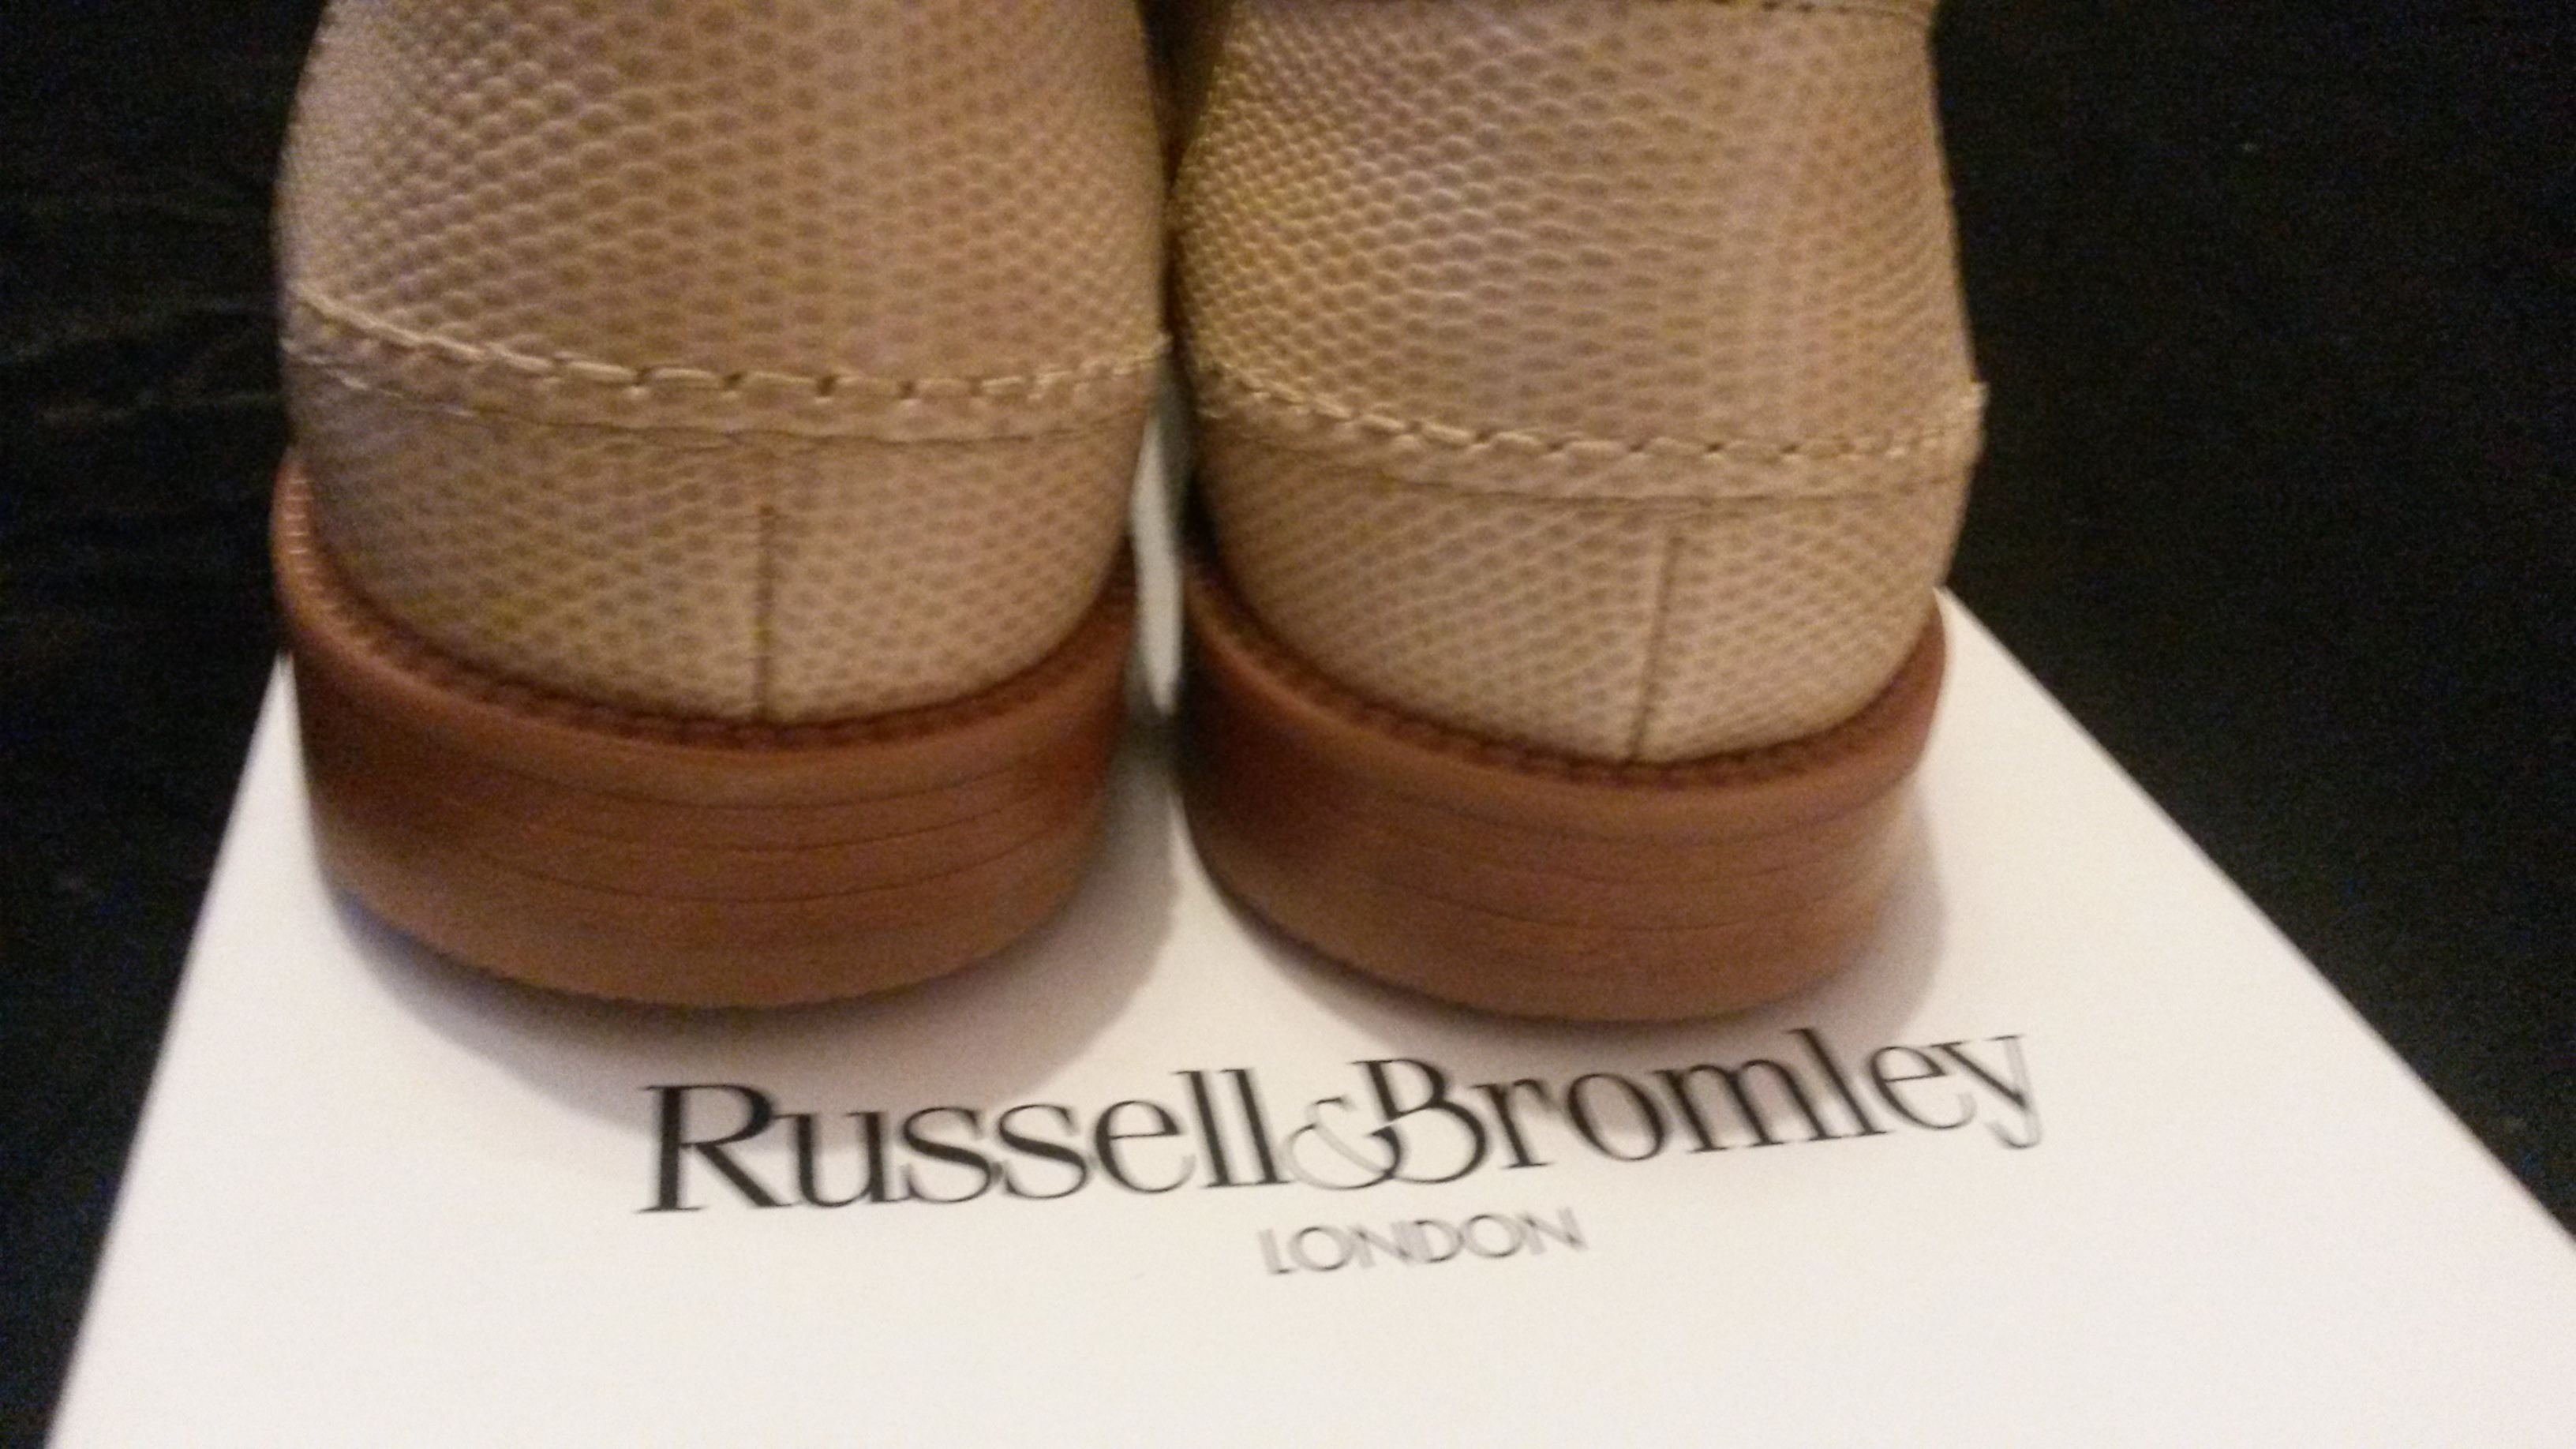 russell and bromley returns policy